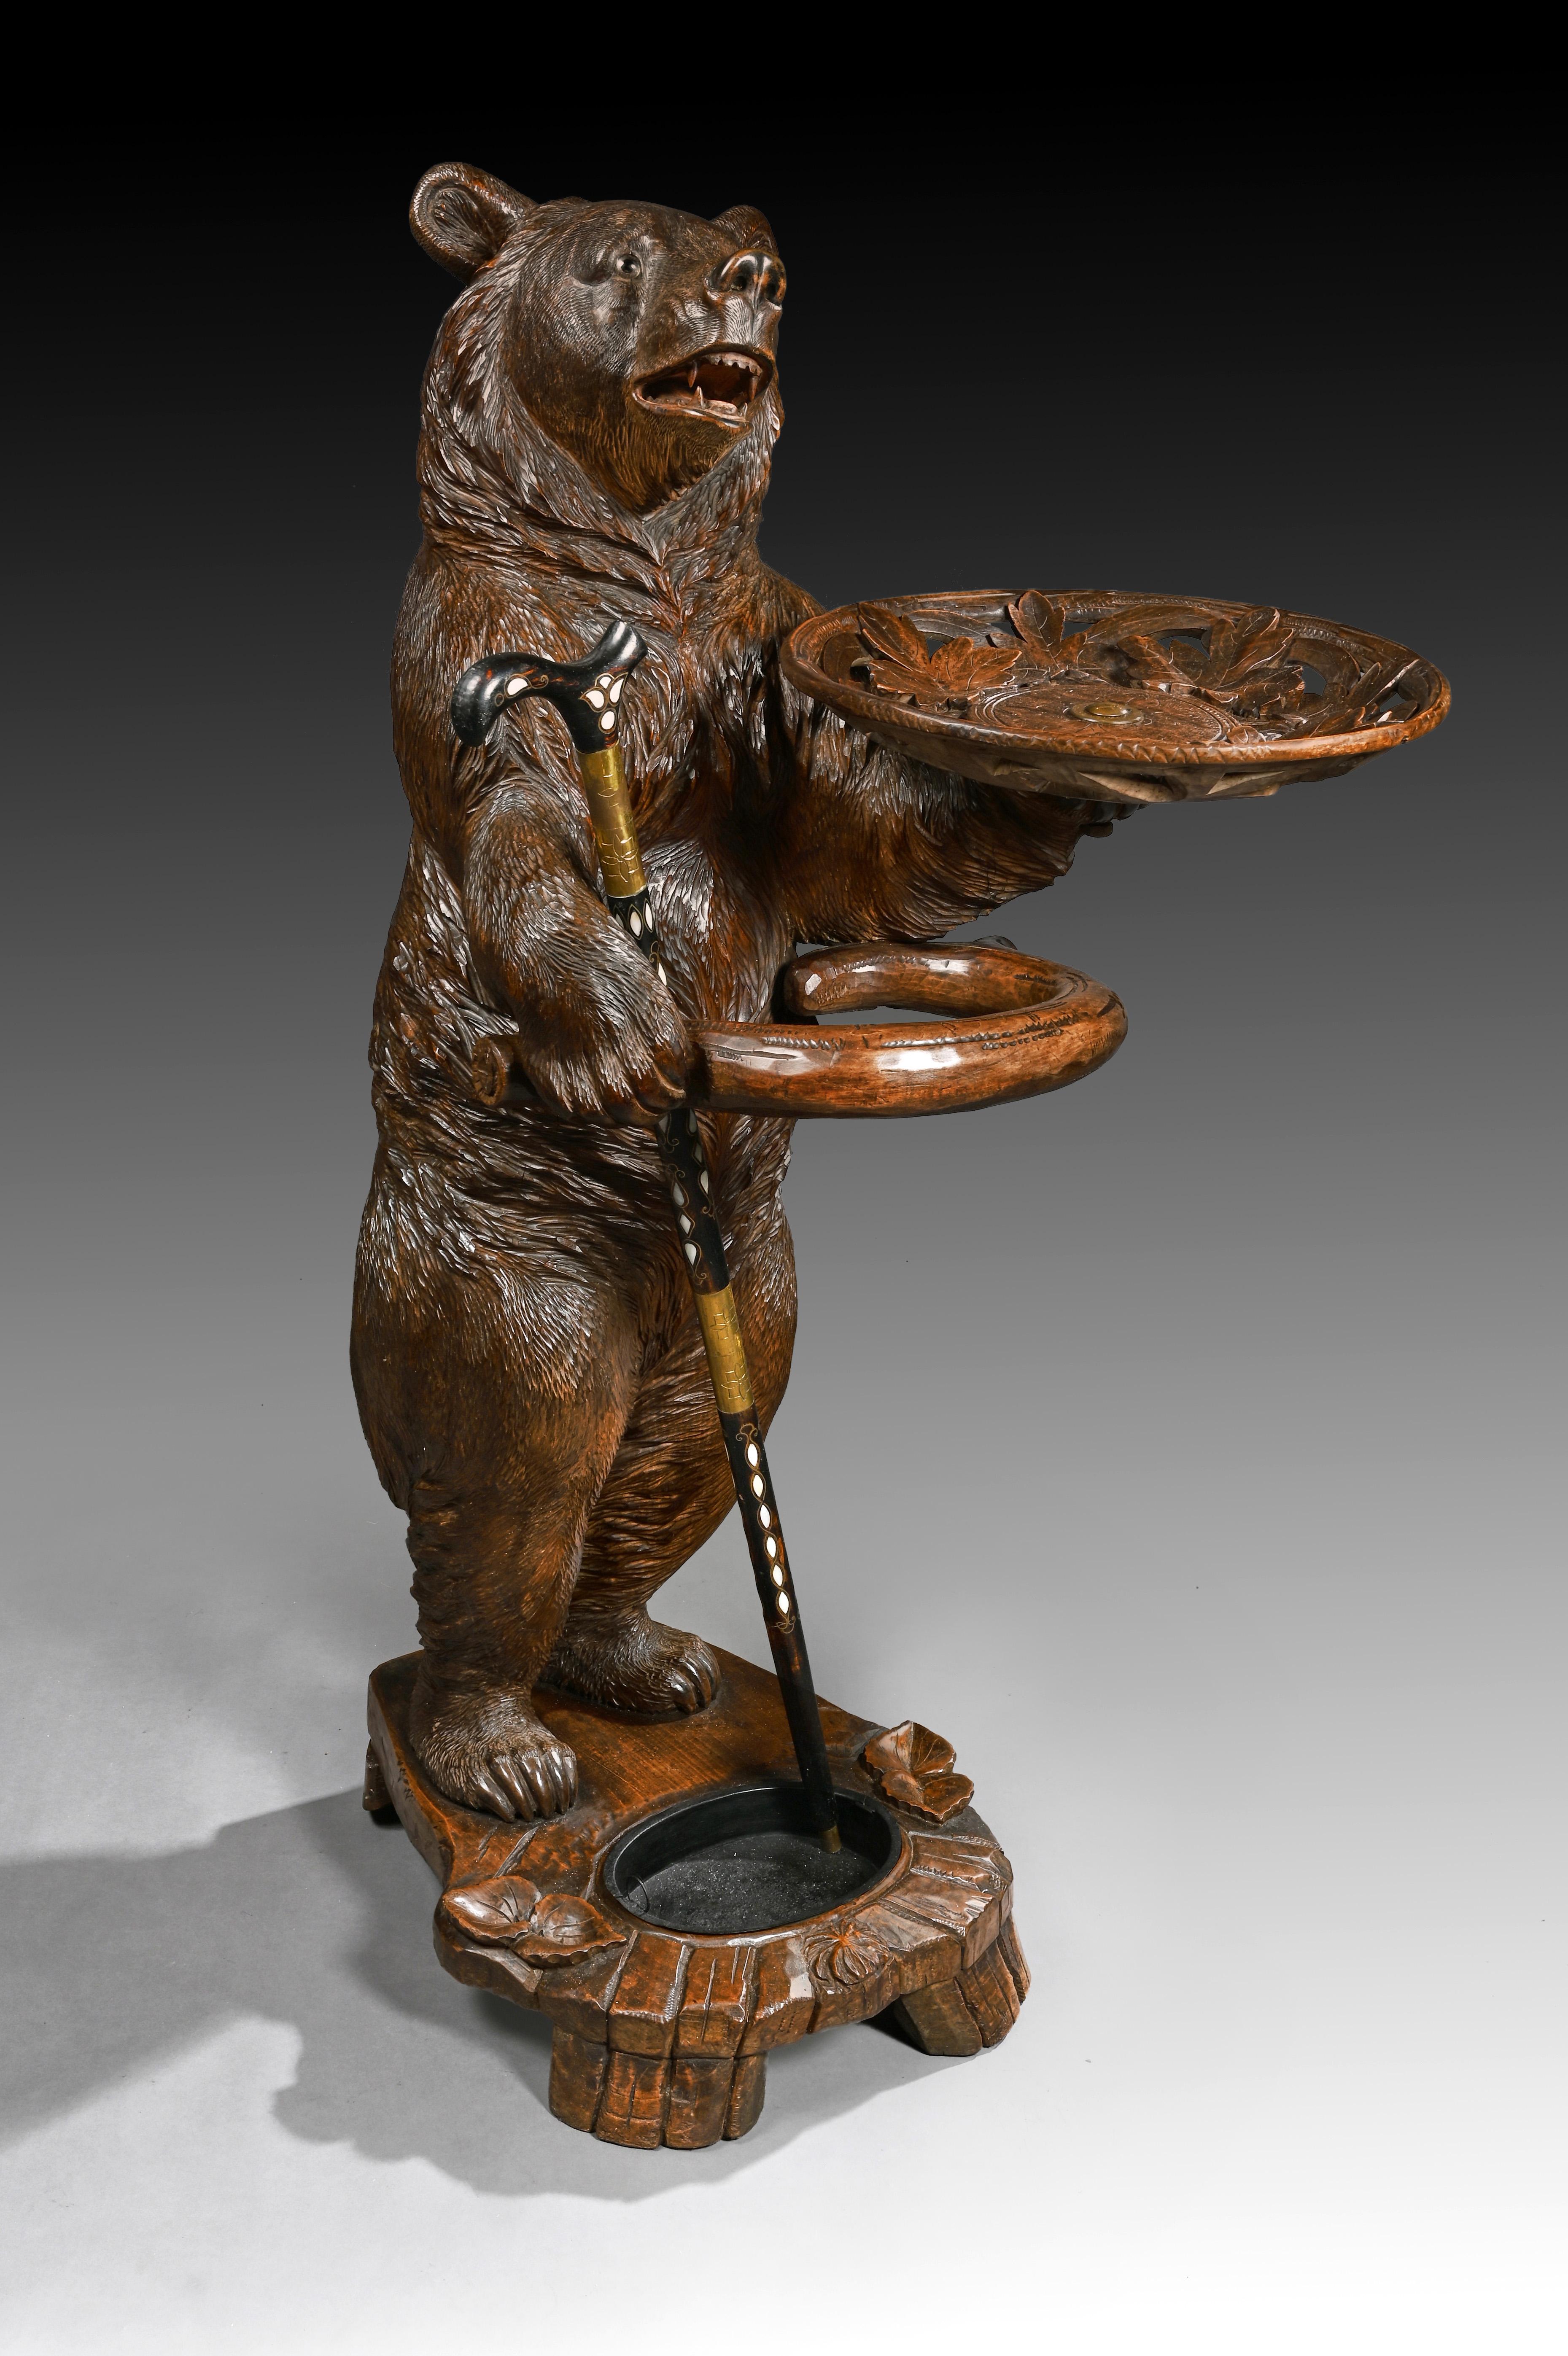 A very large and extremely good quality 19th century Swiss Black Forest bear stick / umbrella stand.

Brienz, Switzerland, circa 1890.

Standing 1.2 meters tall, carved from Linden wood in the Brienz region of Switzerland, a wonderful and rare